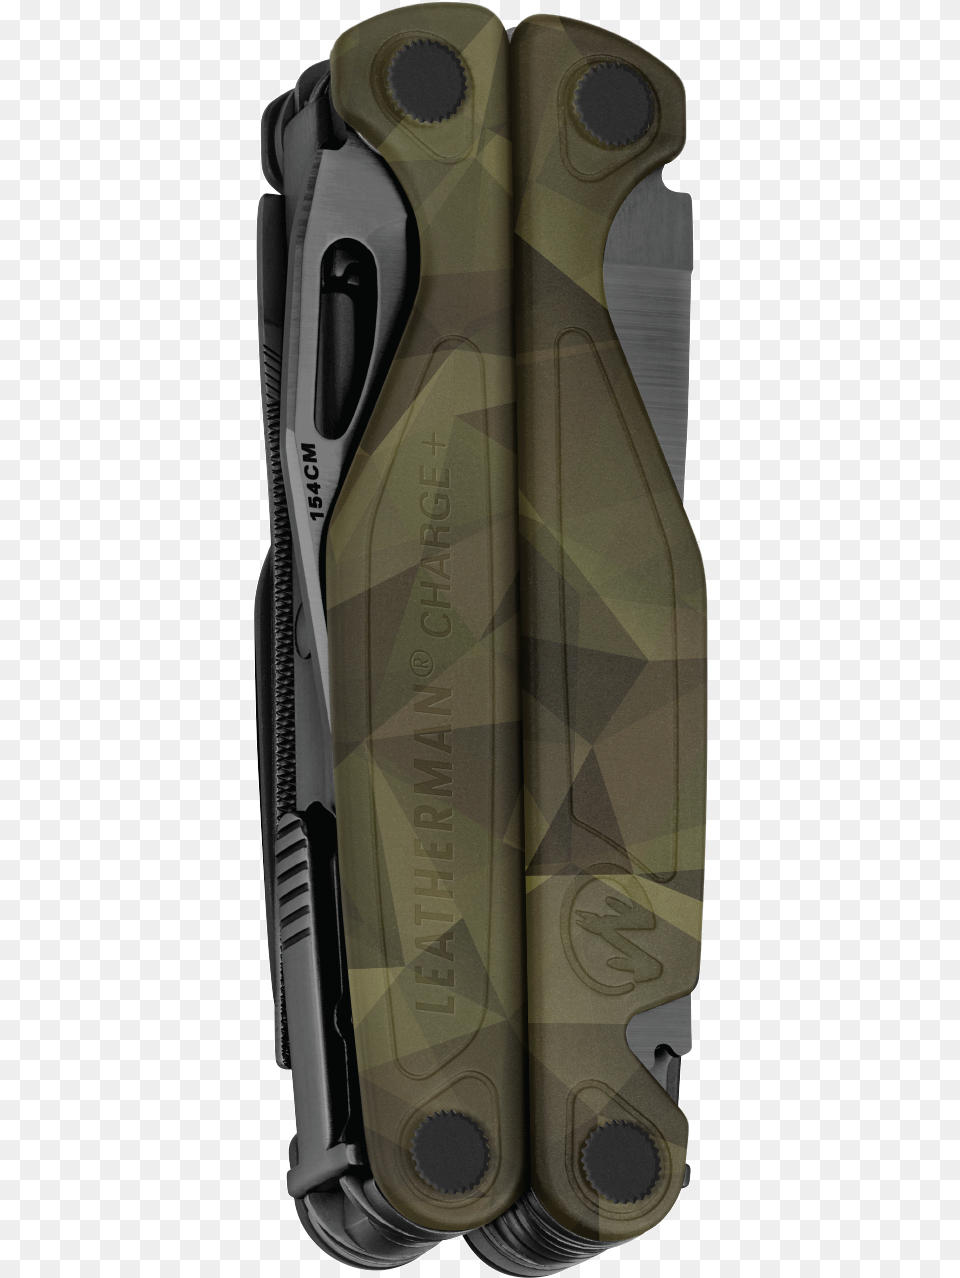 Camo Multi Leatherman, Clothing, Vest, Lifejacket, Armory Free Png Download